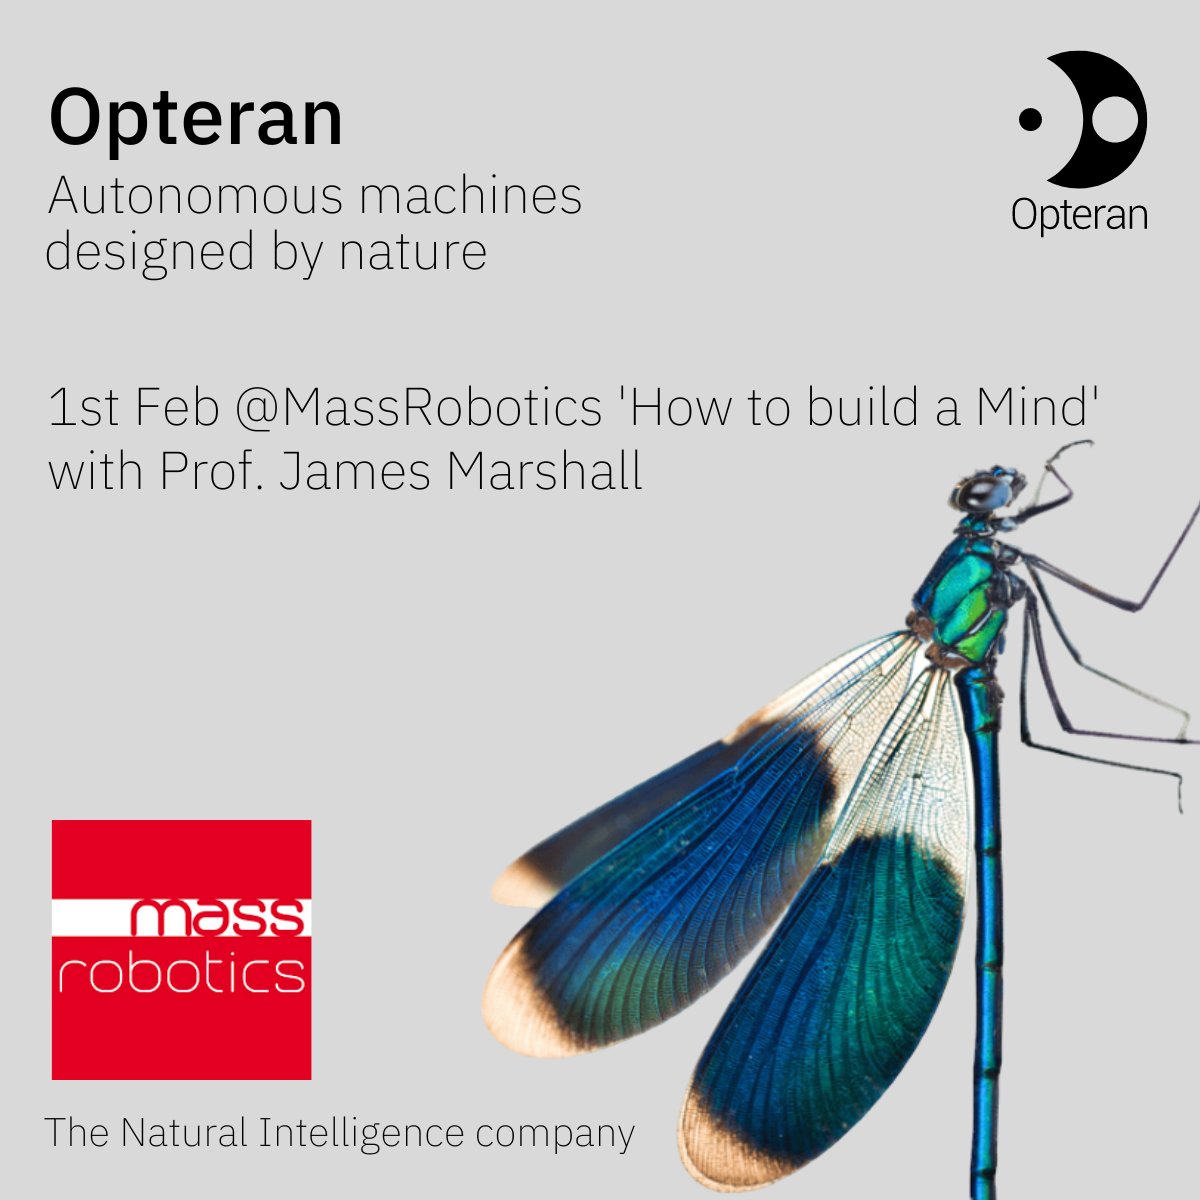 .@Opteran is speaking @MassRobotics on brain biomimicry as a solution for machine navigation. We will be joined by Steve Branch @LocusRobotics discussing the challenges deploying AMRs. #AMR #AGV #SLAM #autonomoussystems #naturalintelligence #robotics